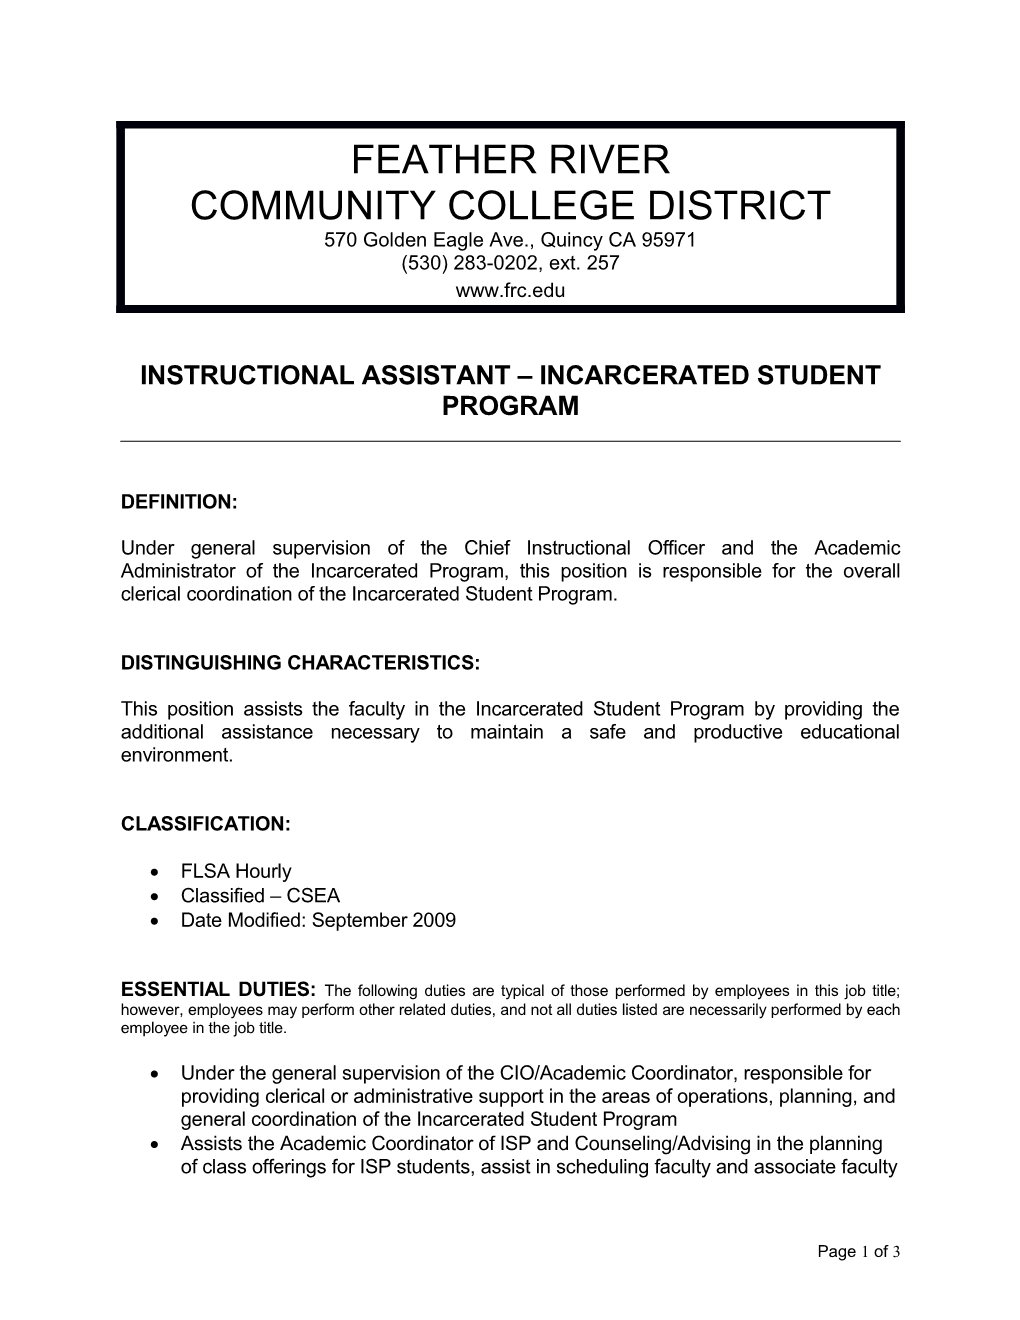 Instructional Assistant Incarcerated Student Program